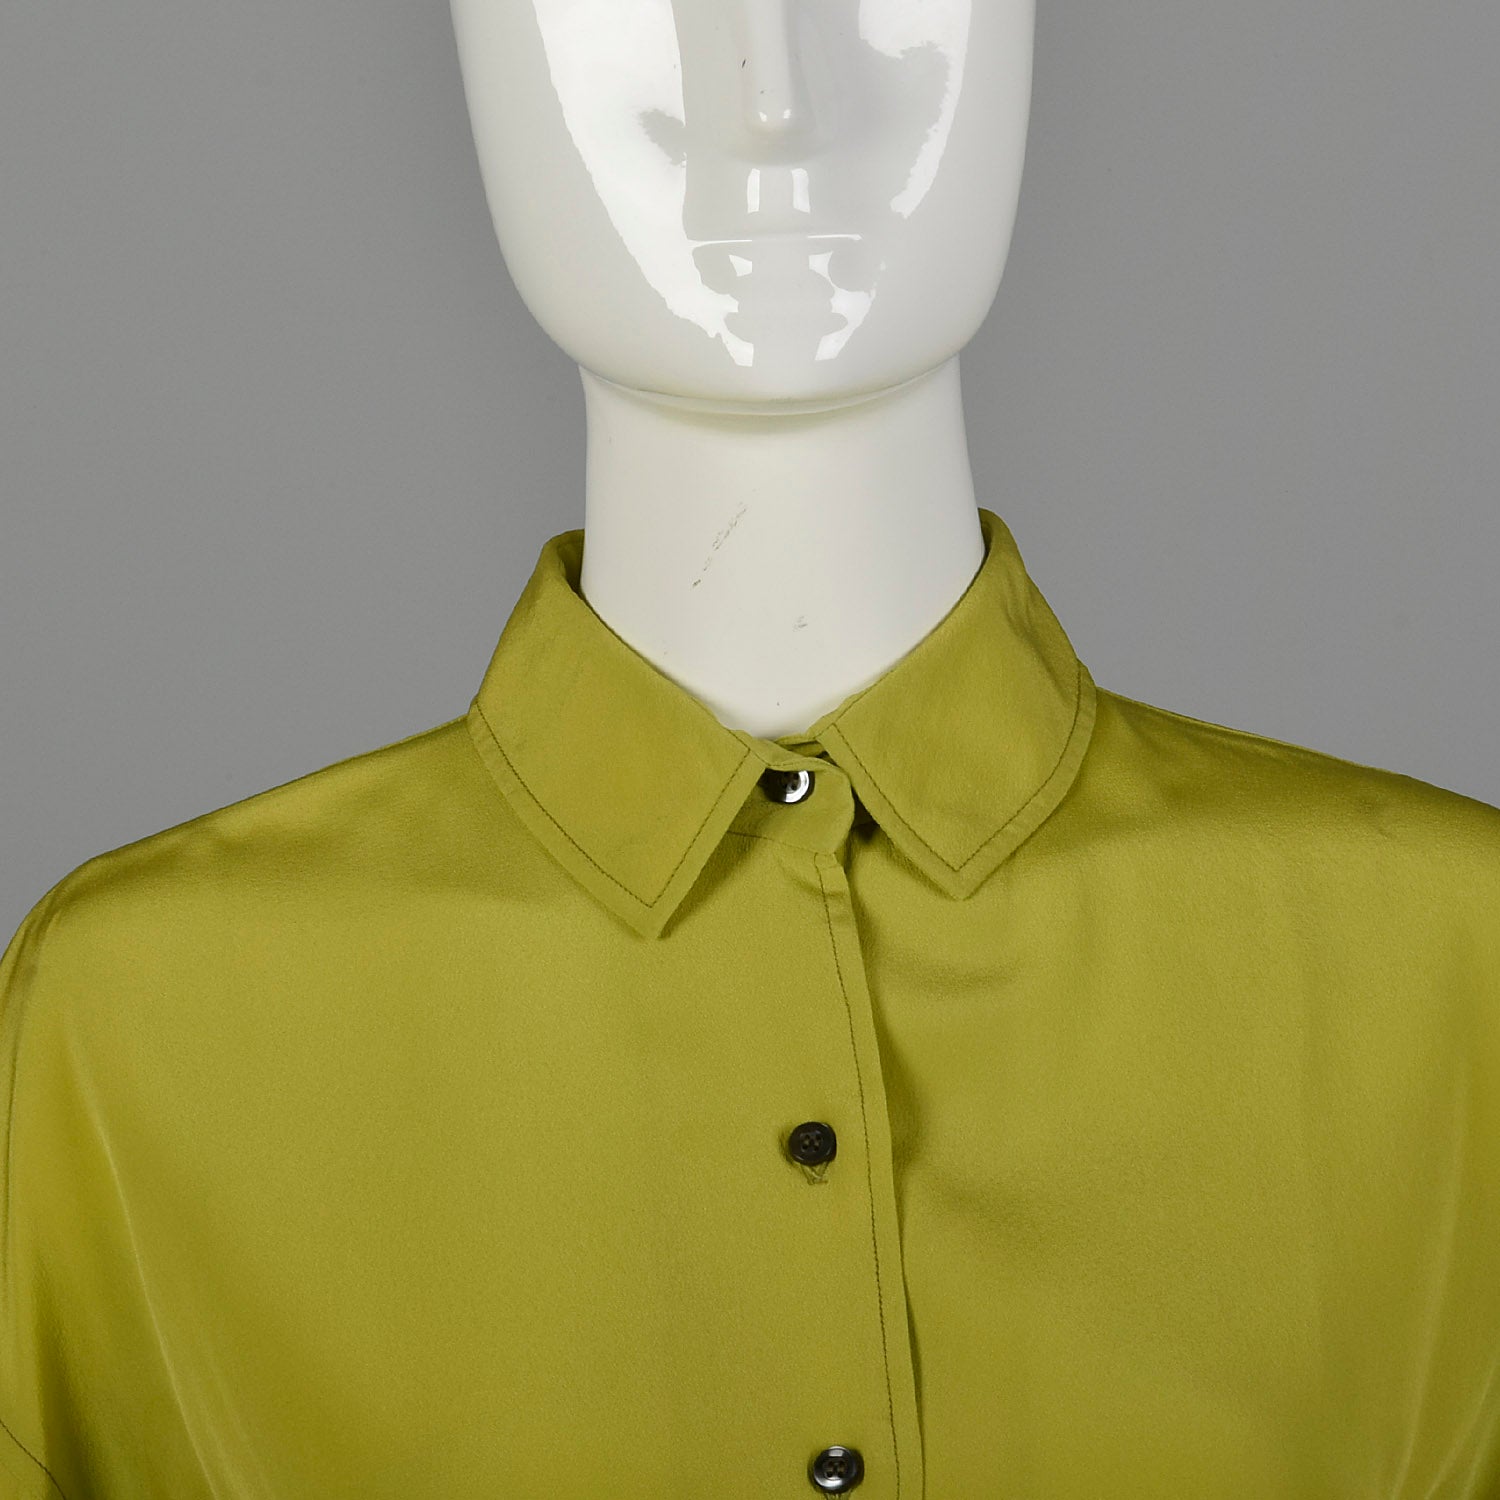 Medium 1950s Chartreuse Button Up Blouse